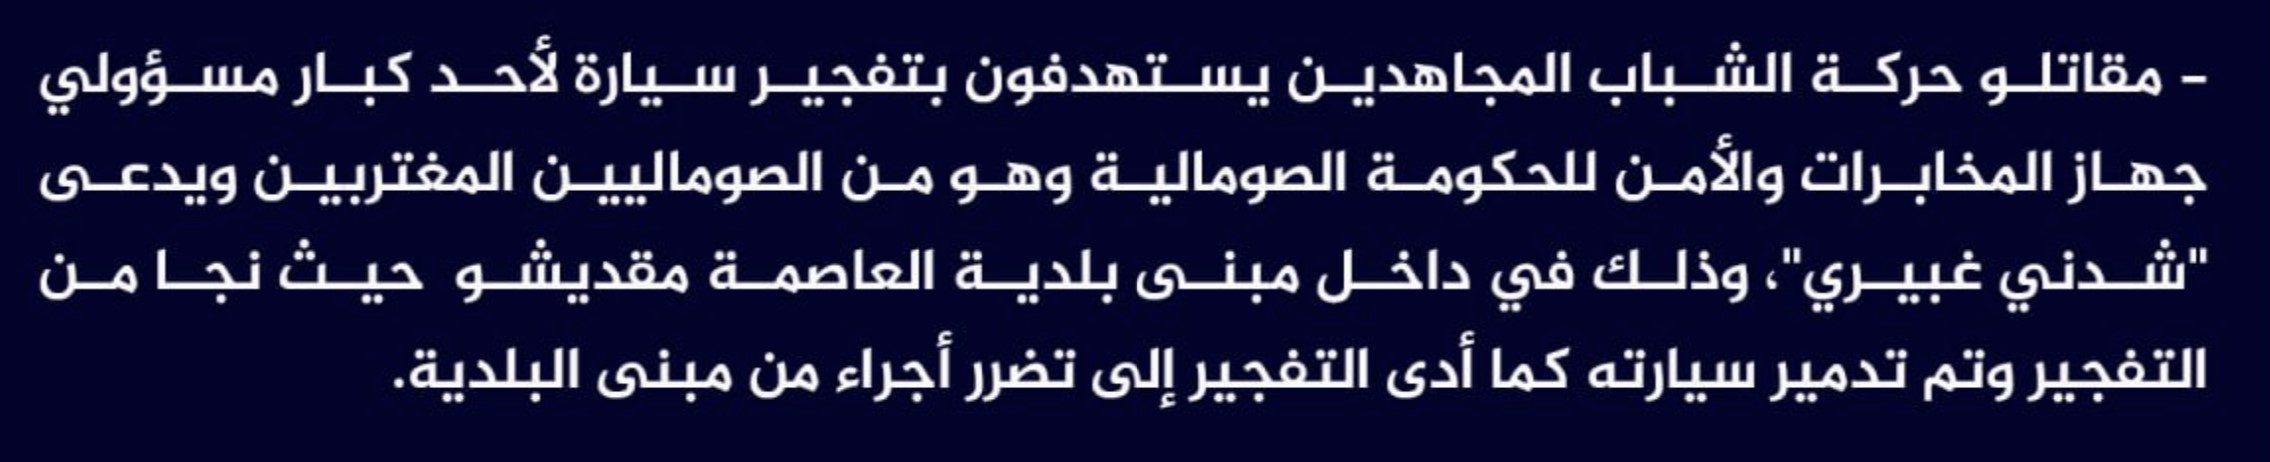 (Claim) al-Shabaab: A High-Ranking Intelligence and Security Official Named Shadni Ghaberi, Survived an IED Attack that Targeted His Vehicle at Mogadishu Municipality, Somalia - 17 May 2023